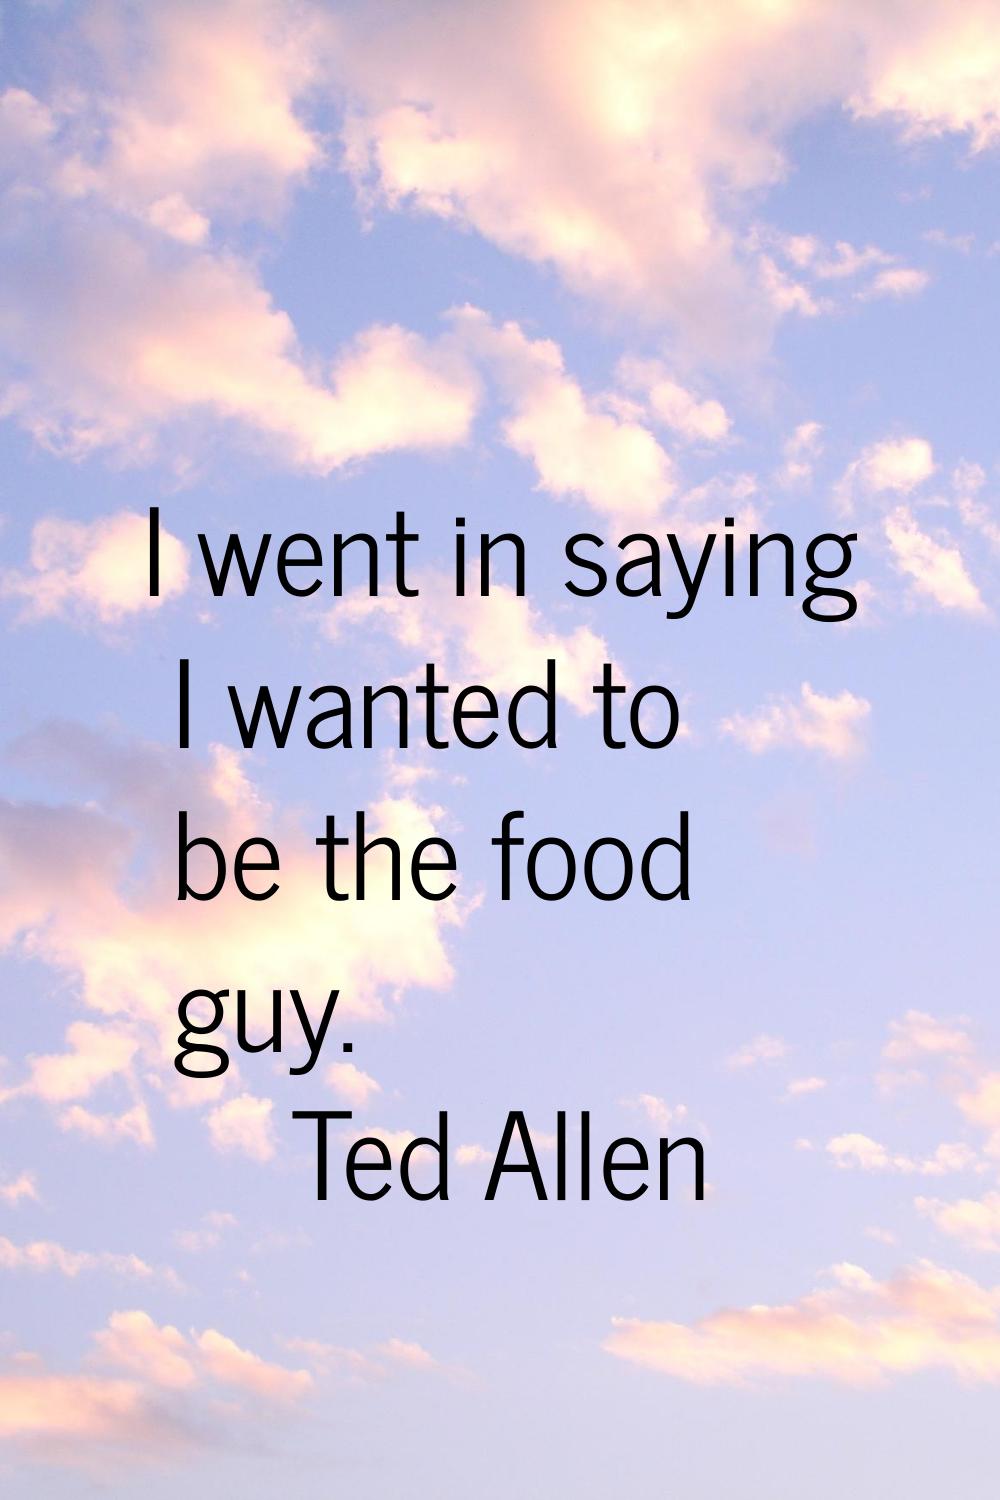 I went in saying I wanted to be the food guy.